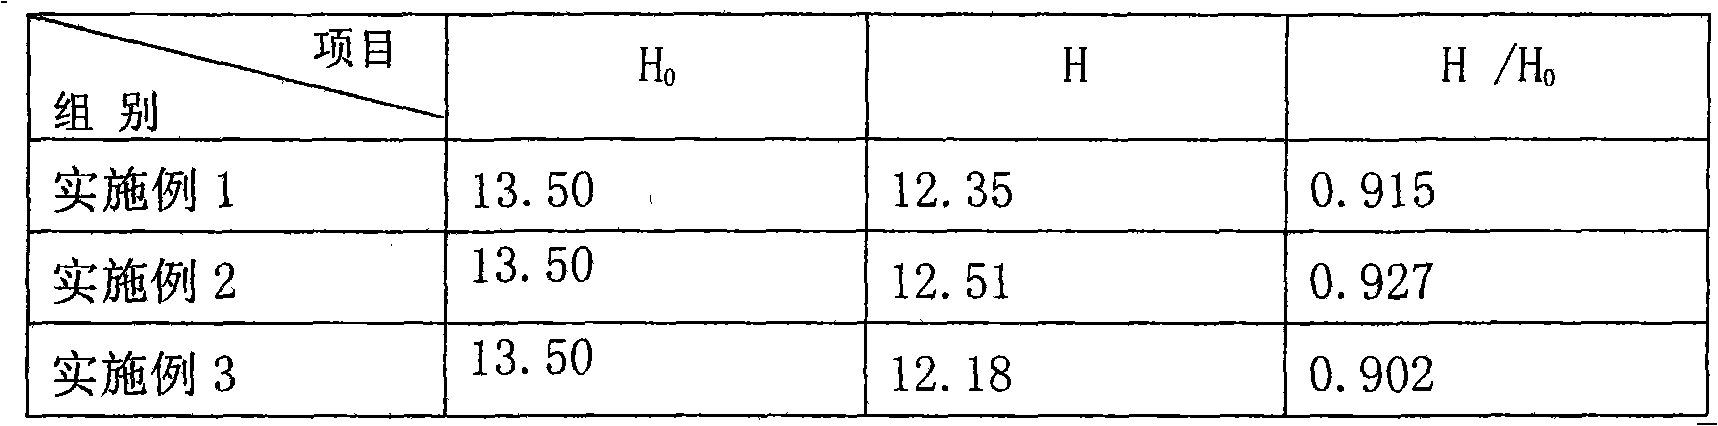 Coccidiostat-decoquinate dry suspension for livestock and poultry and preparation method thereof